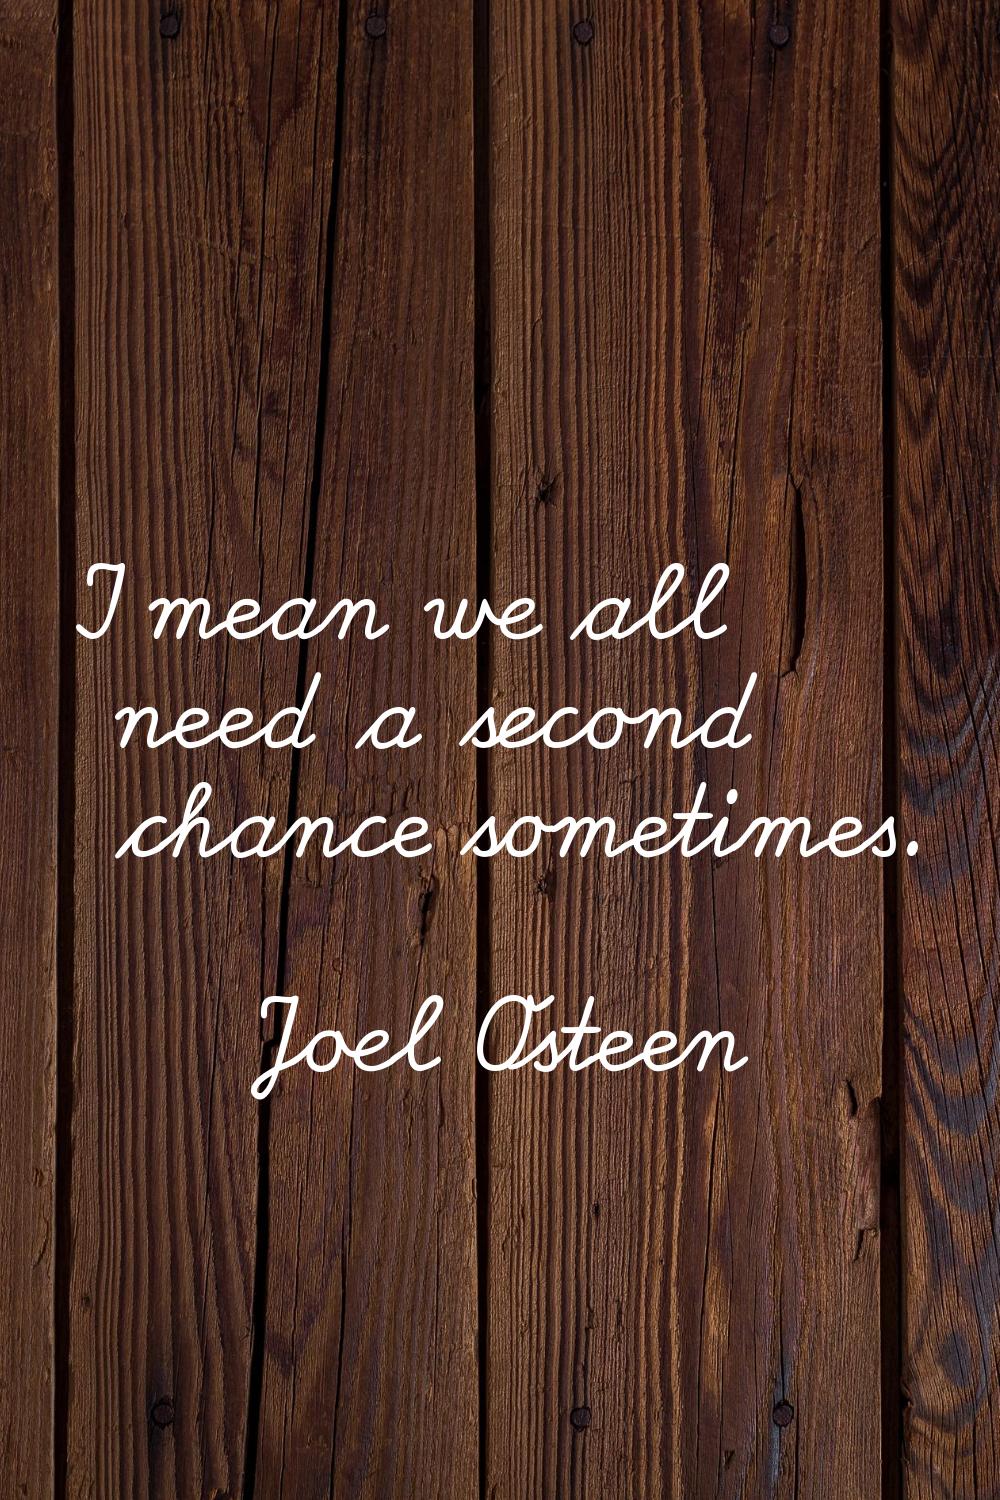 I mean we all need a second chance sometimes.